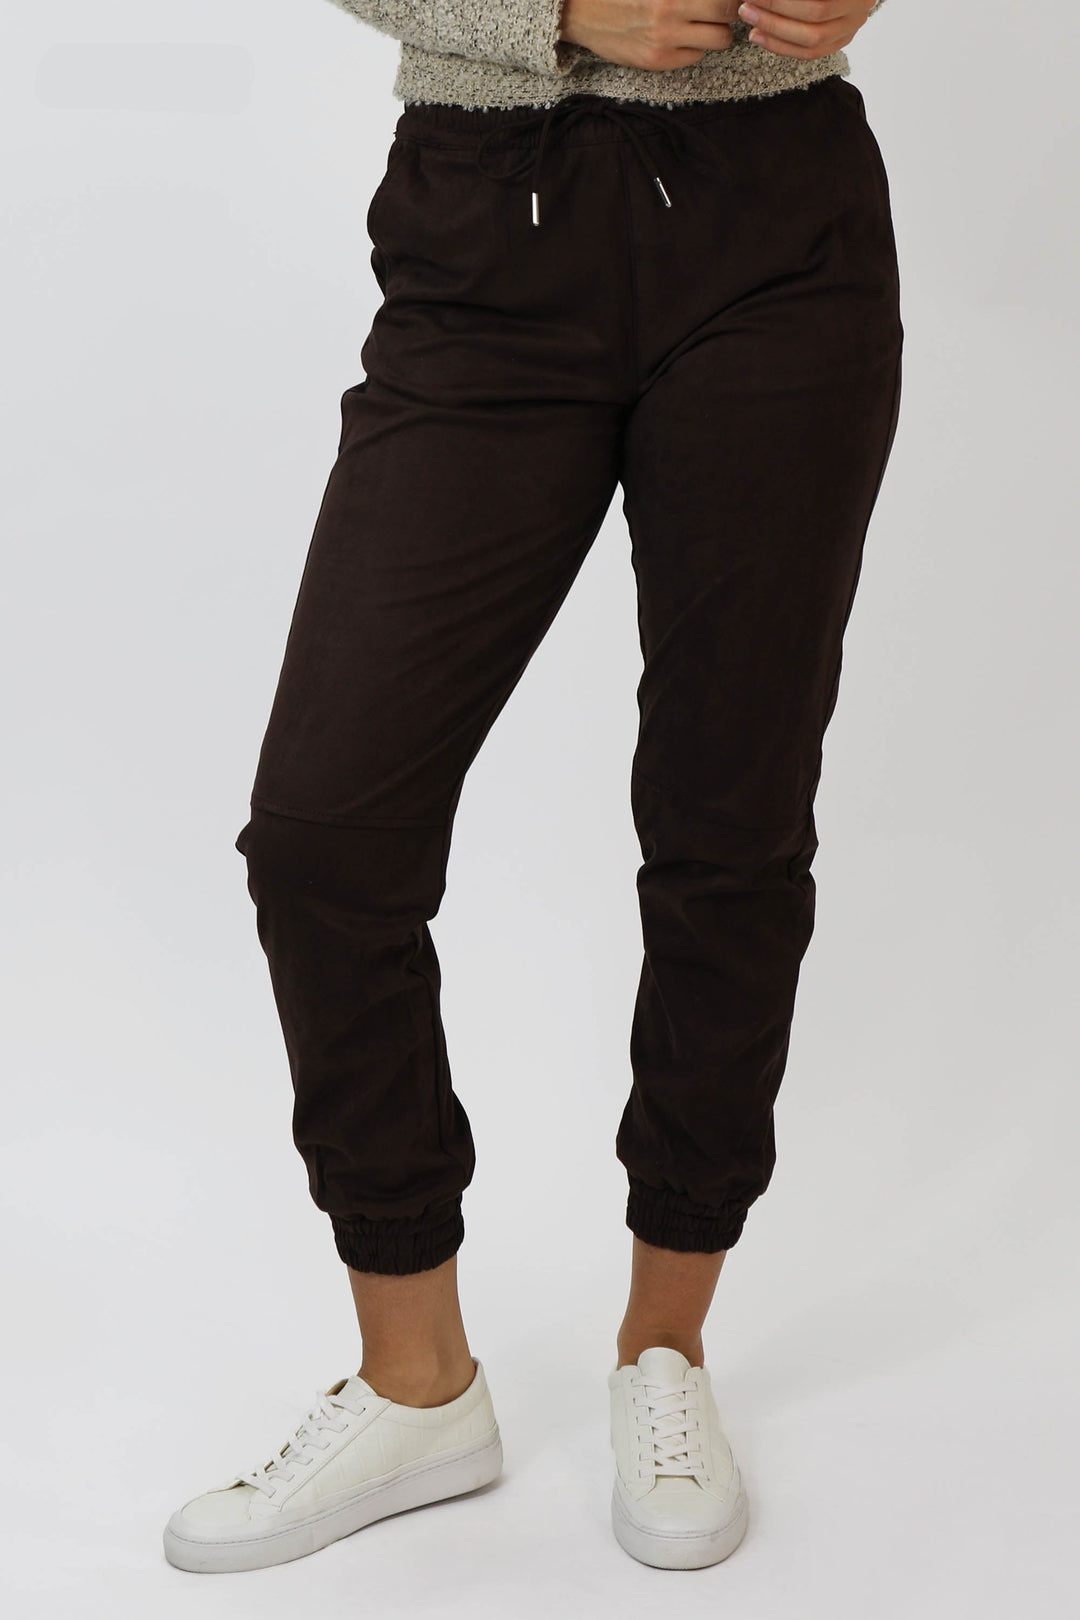 image of a female model wearing a JACEY SUPER HIGH RISE CROPPED JOGGER PANTS MACAROON PANTS